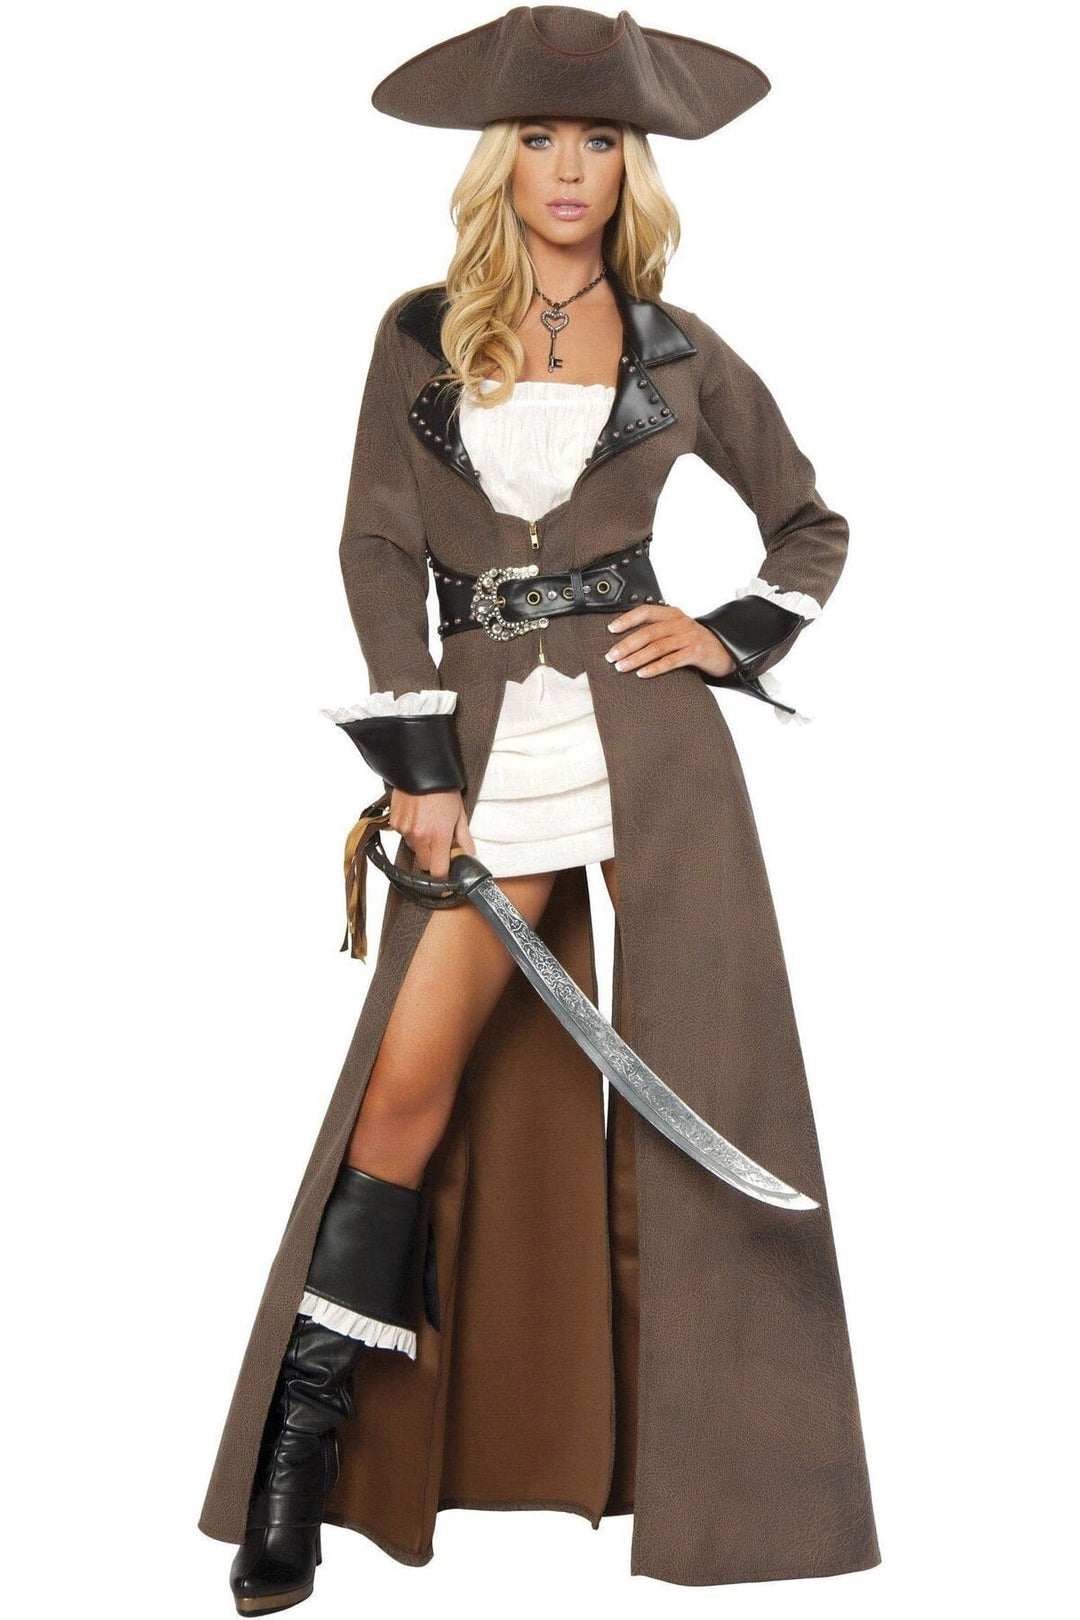 SS-Roma Deluxe Pirate Captain Costume-Clothing-Roma Brand-Brown-XL-SEXYSHOES.COM